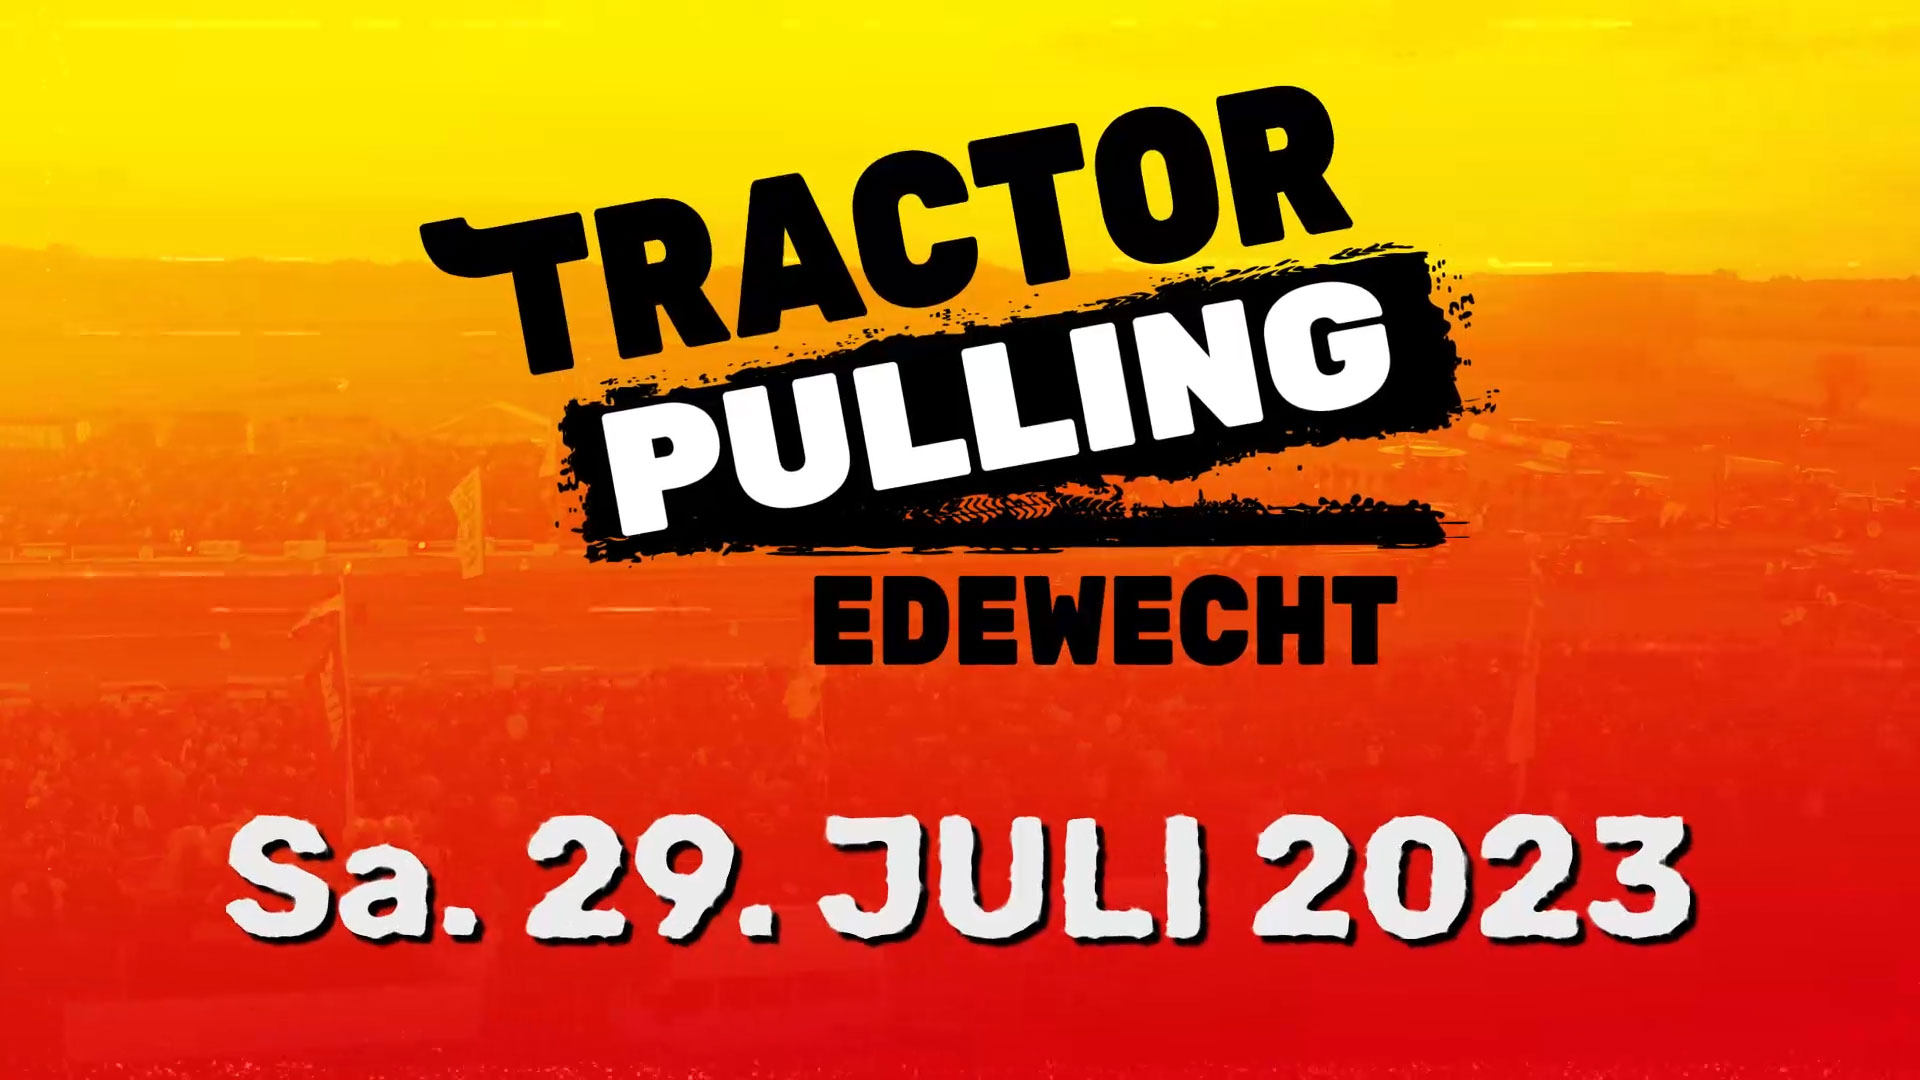 Tractor Pulling Edewecht — Full enough! not is Pull